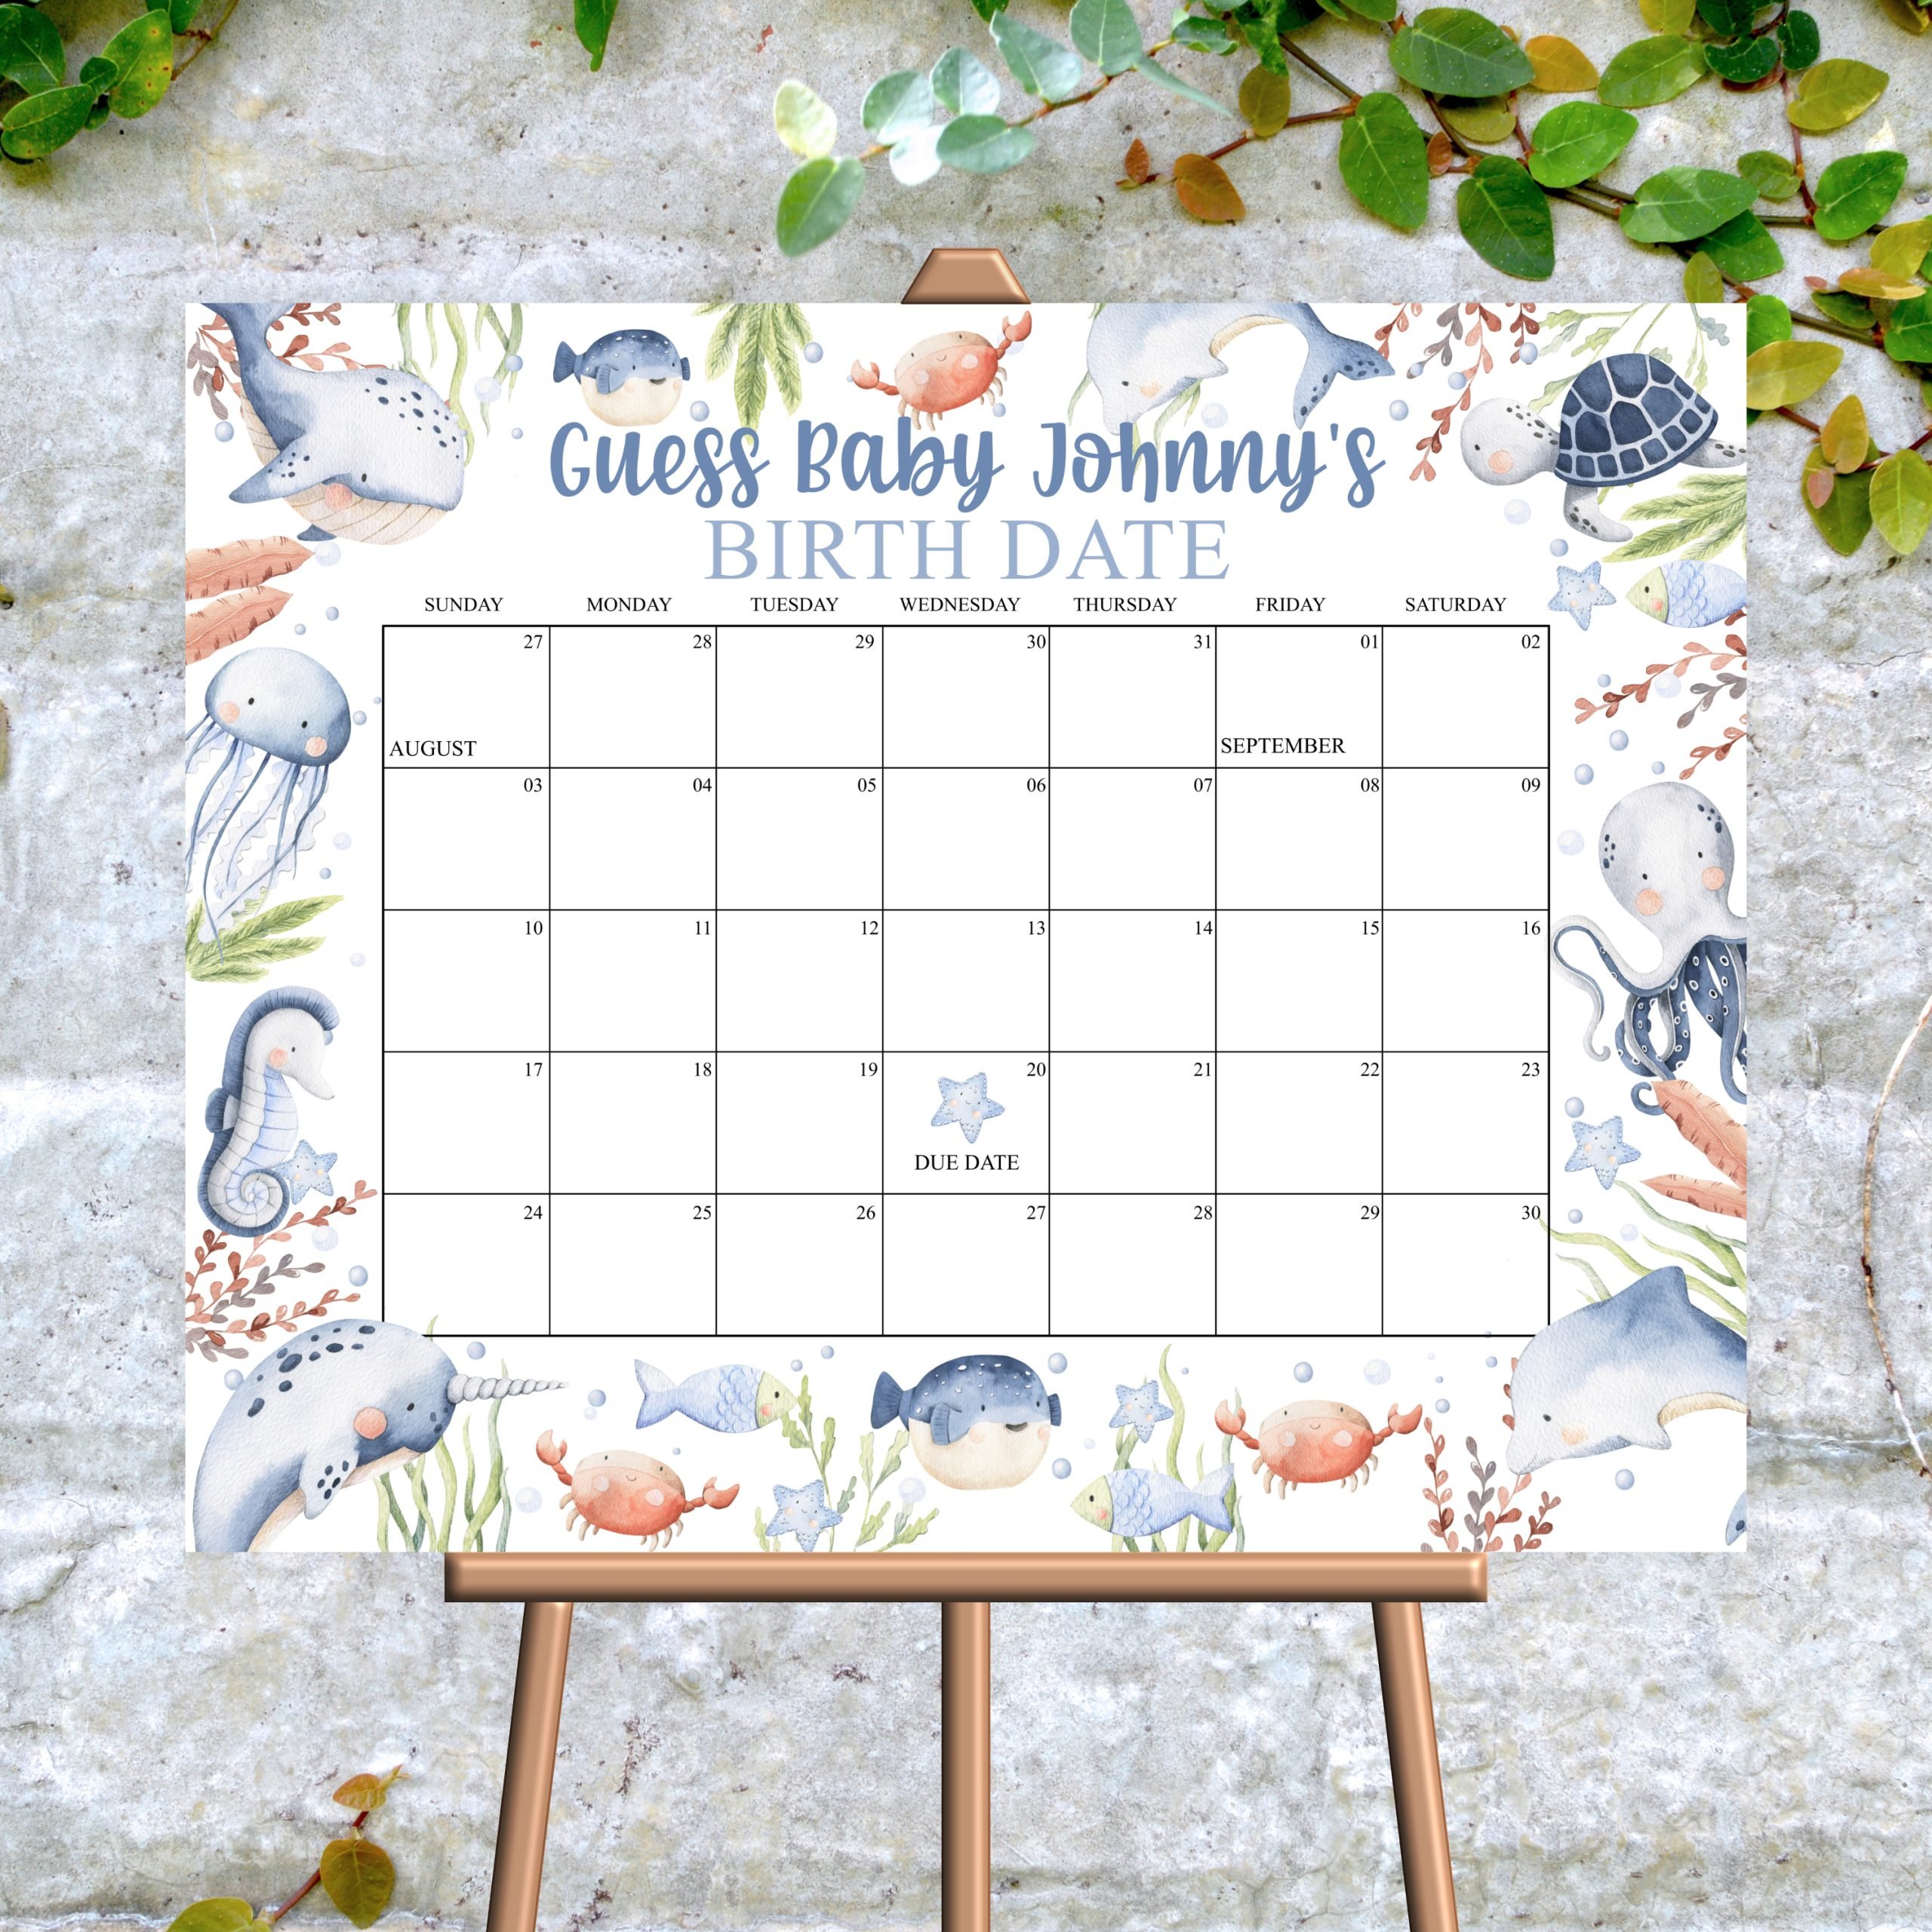 Baby Due Date Chart Game Editable Baby Due Date Calendar Game – Blue Boy Under the Sea Baby Shower Game Baby Shower Activity